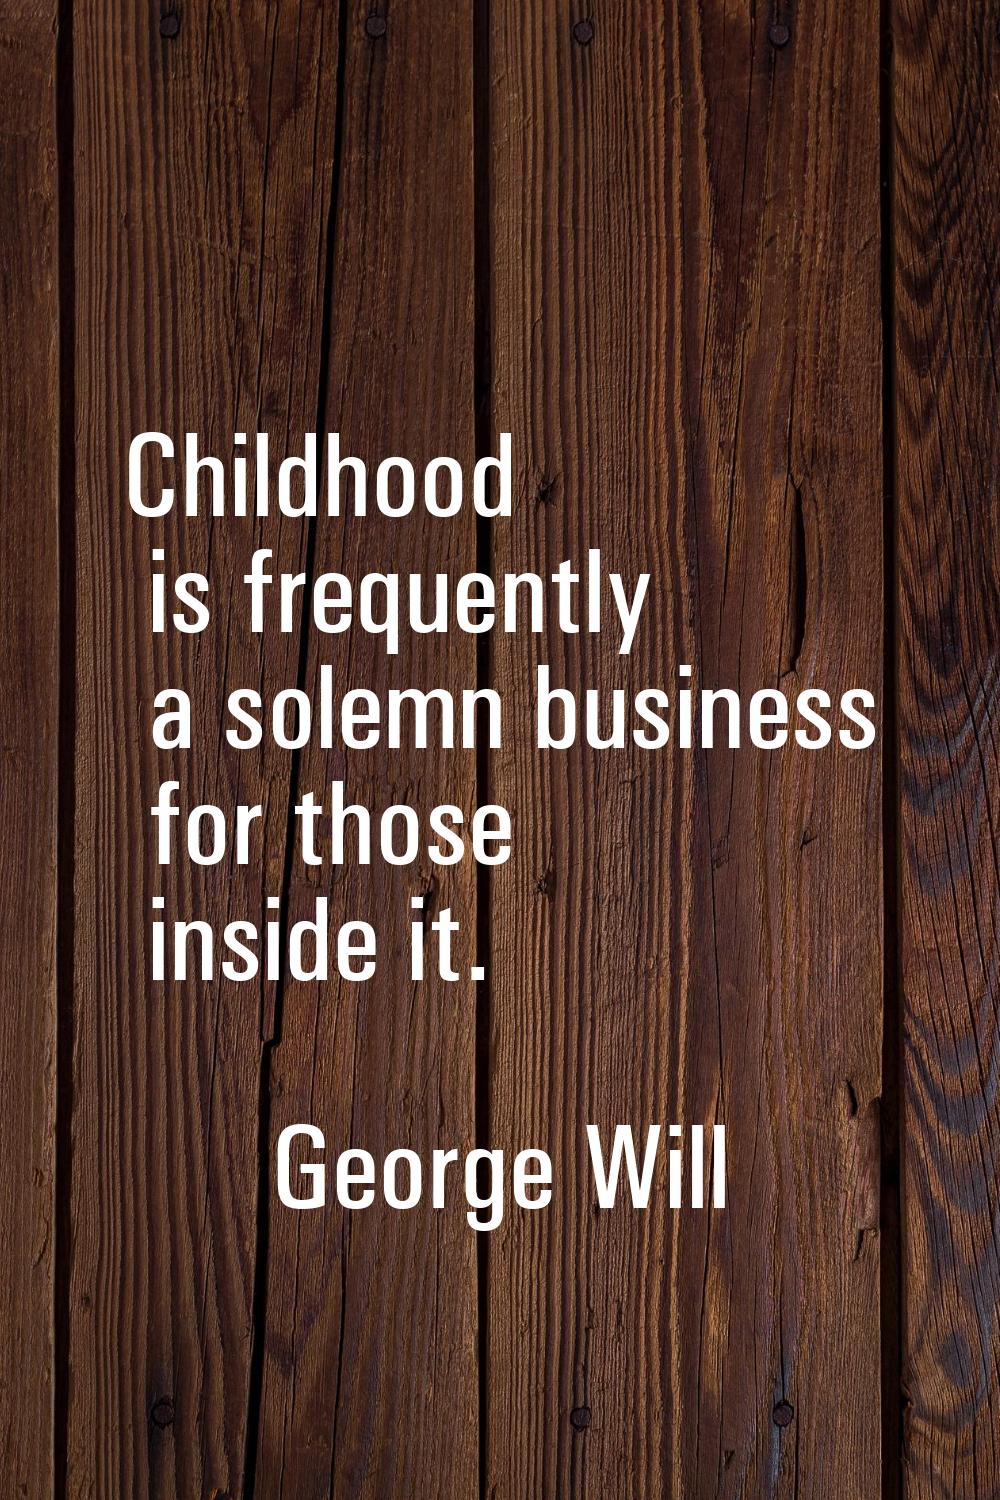 Childhood is frequently a solemn business for those inside it.